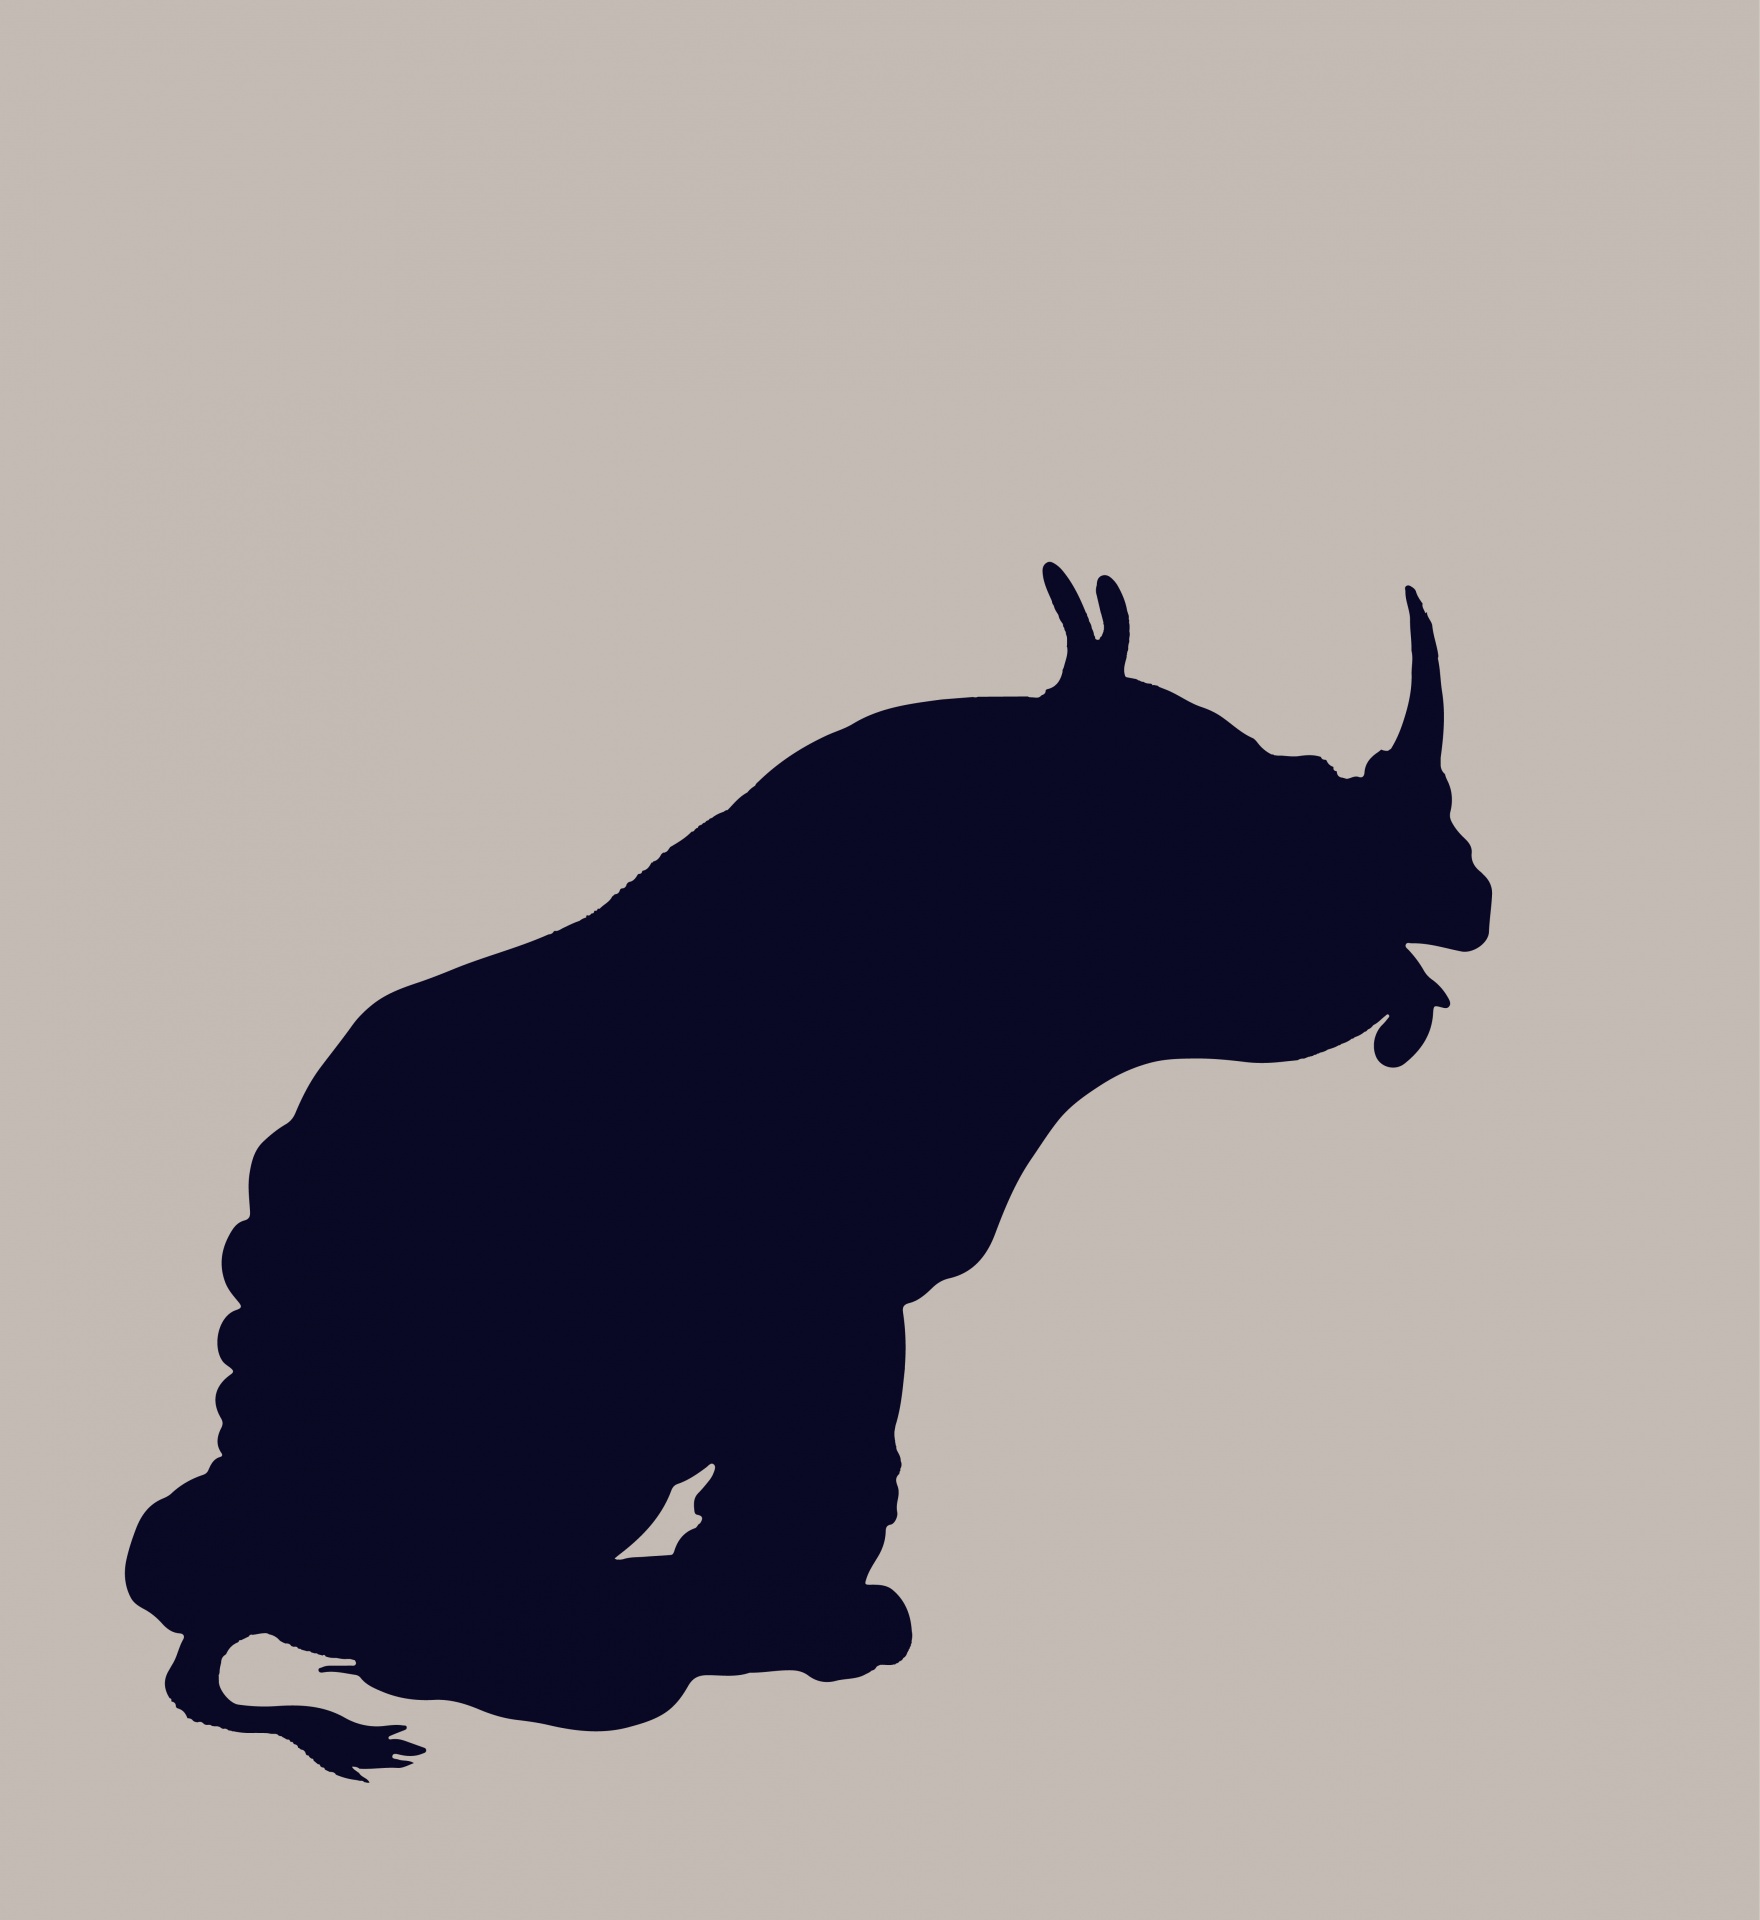 Black art illustration of a cartoon rhino silhouette clipart on neutral background